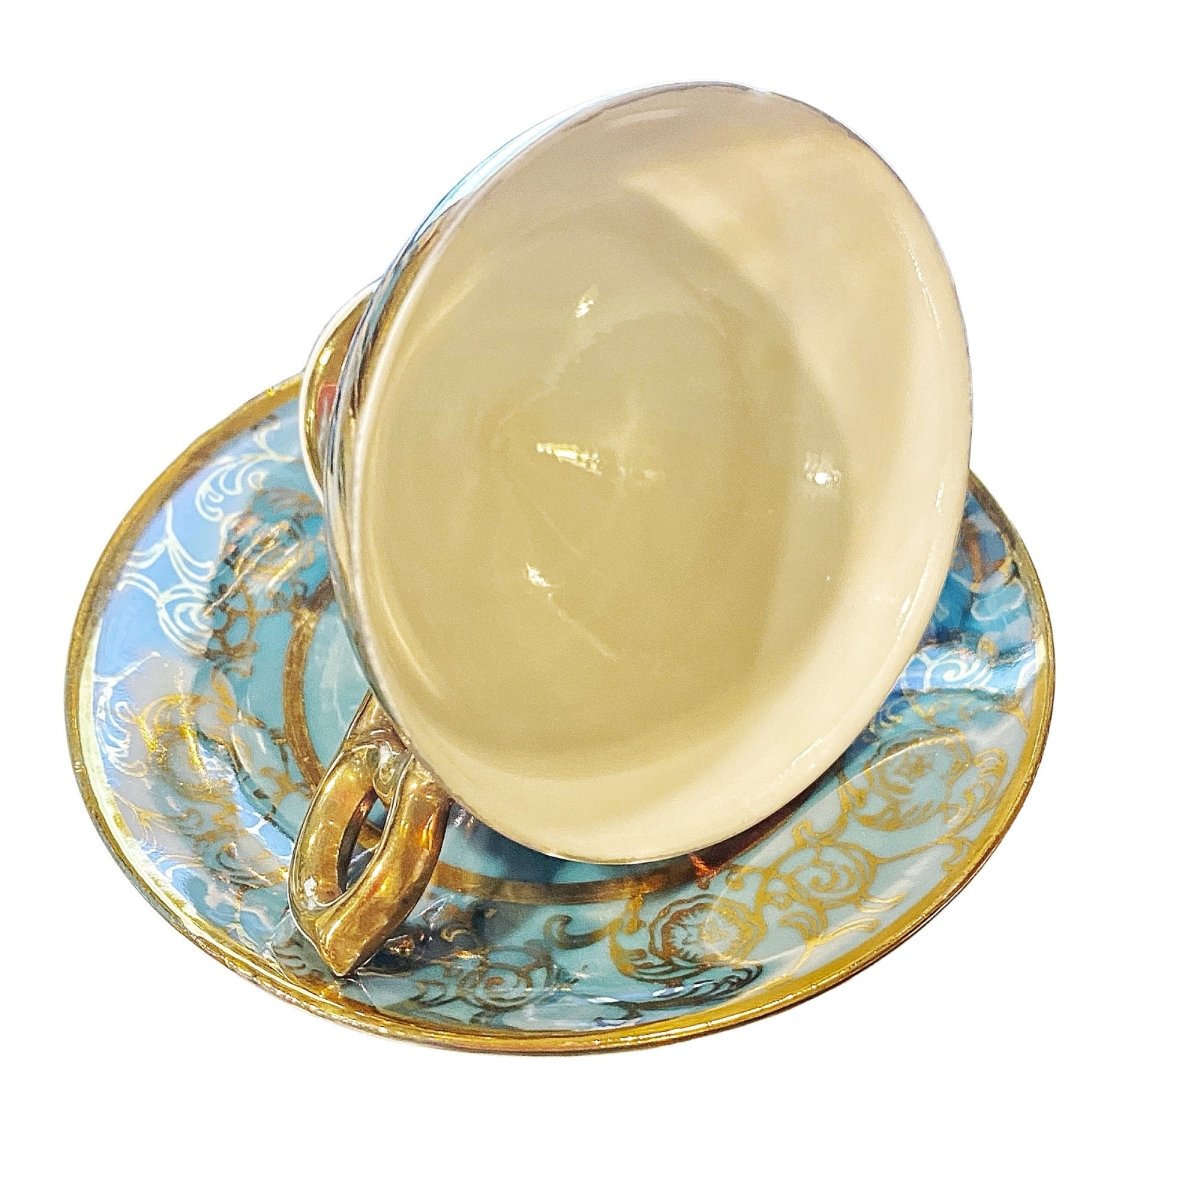 Lusterware | Olive Green | Pedestal Footed Mocha Cup with Golden Flower & Vine Decoration Around the Rim - Chinamania.shop